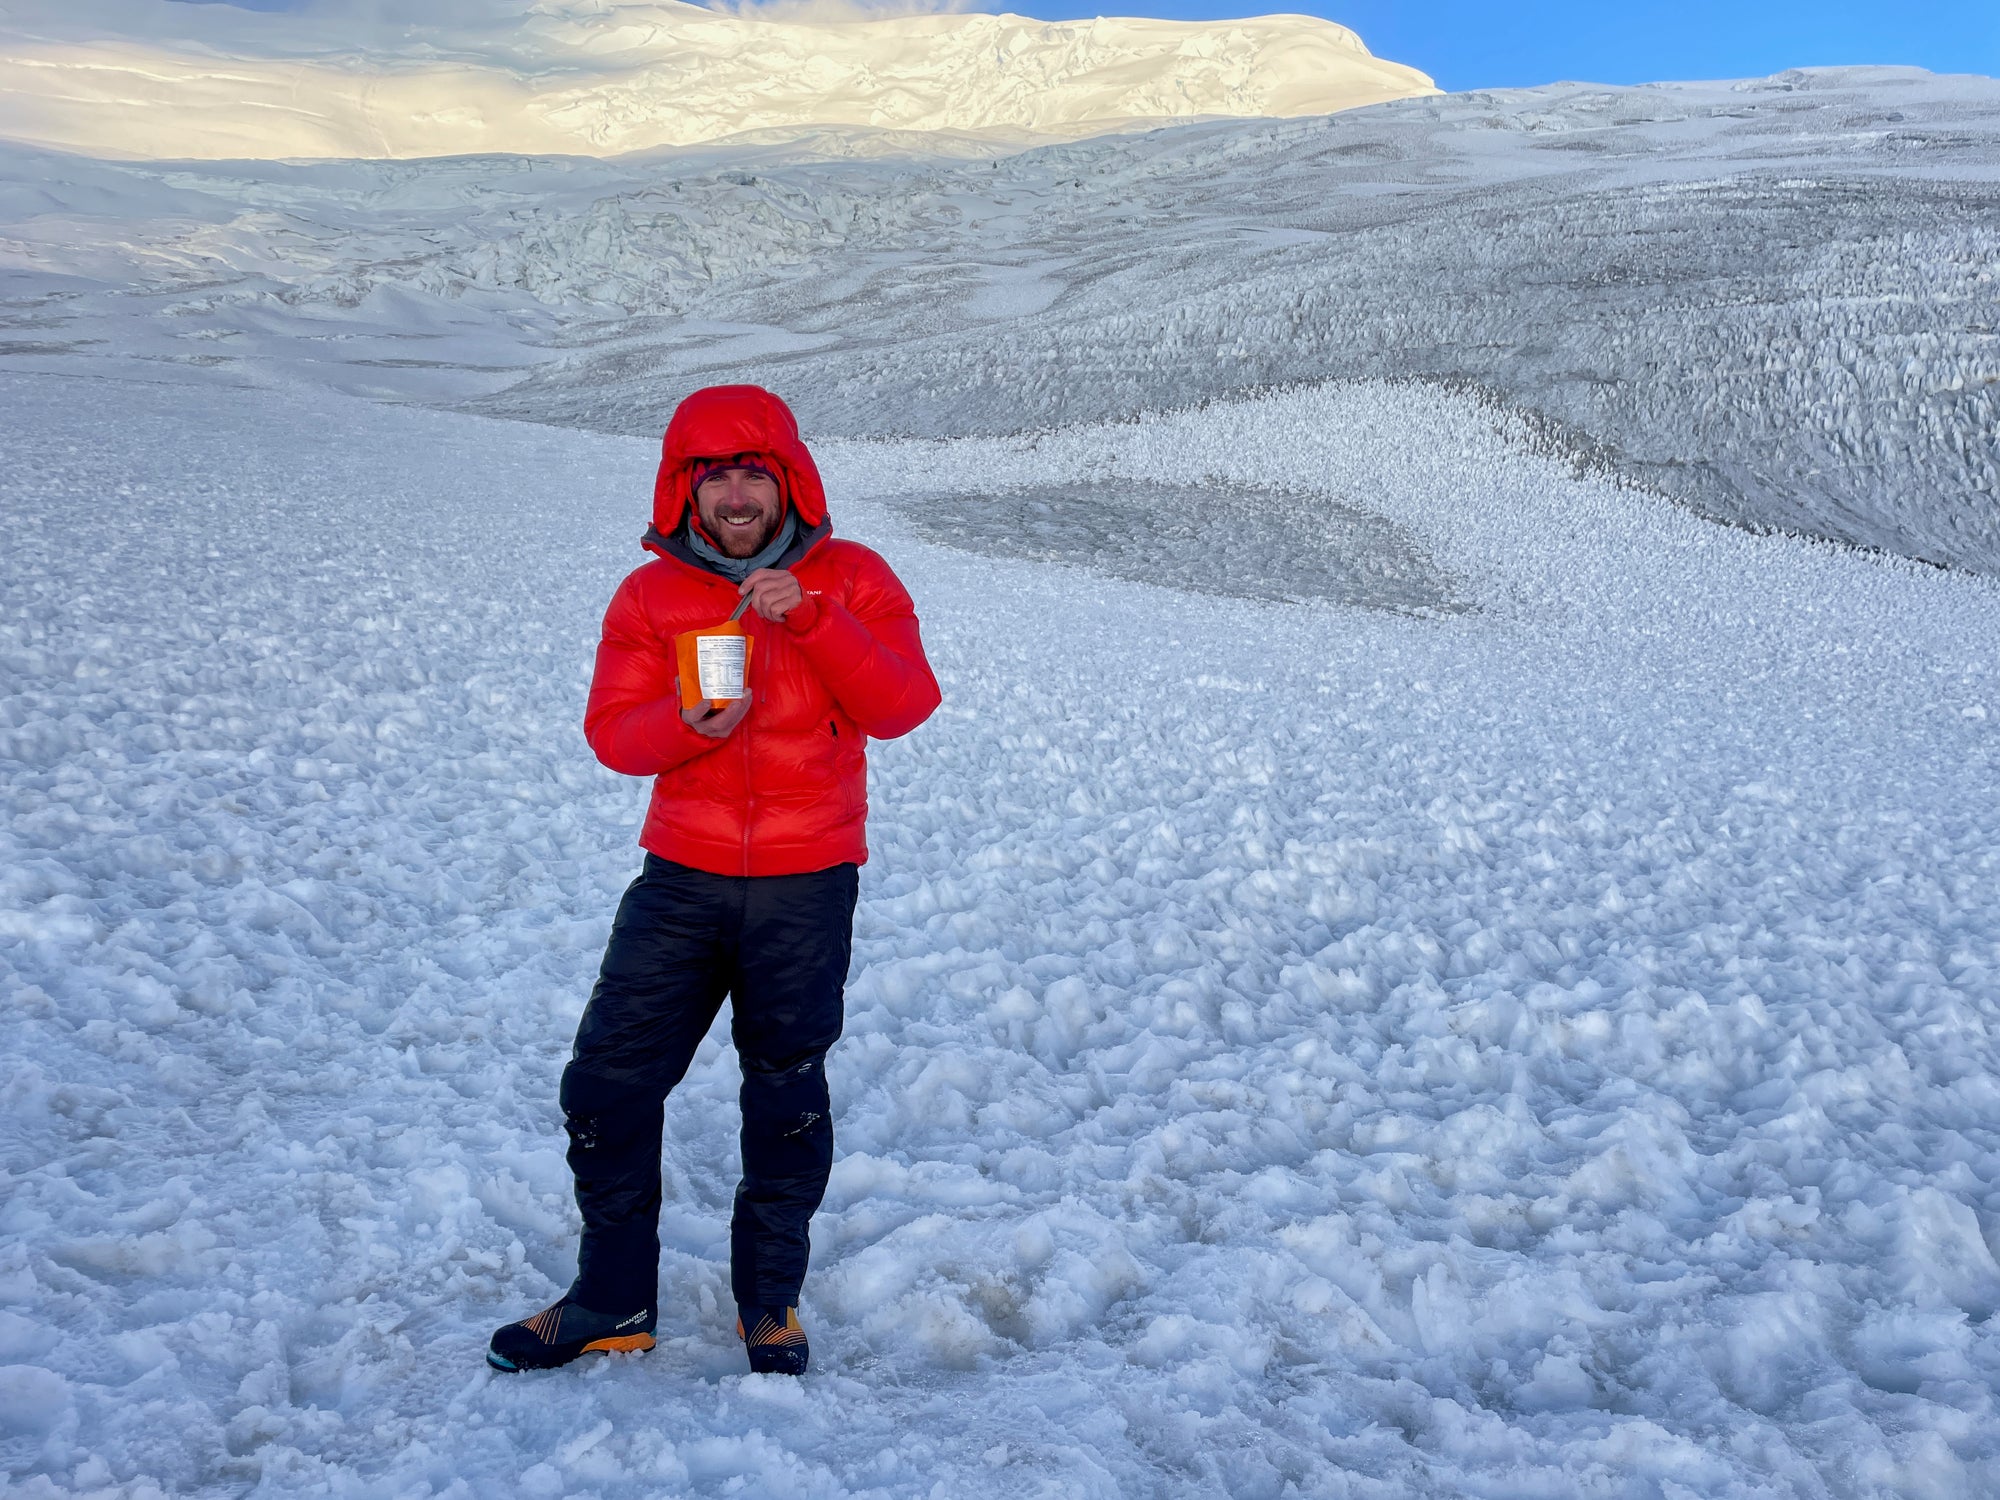 A man standing in a snow field wearing a bright red jacket eating an Expedition Foods freeze-dried meal